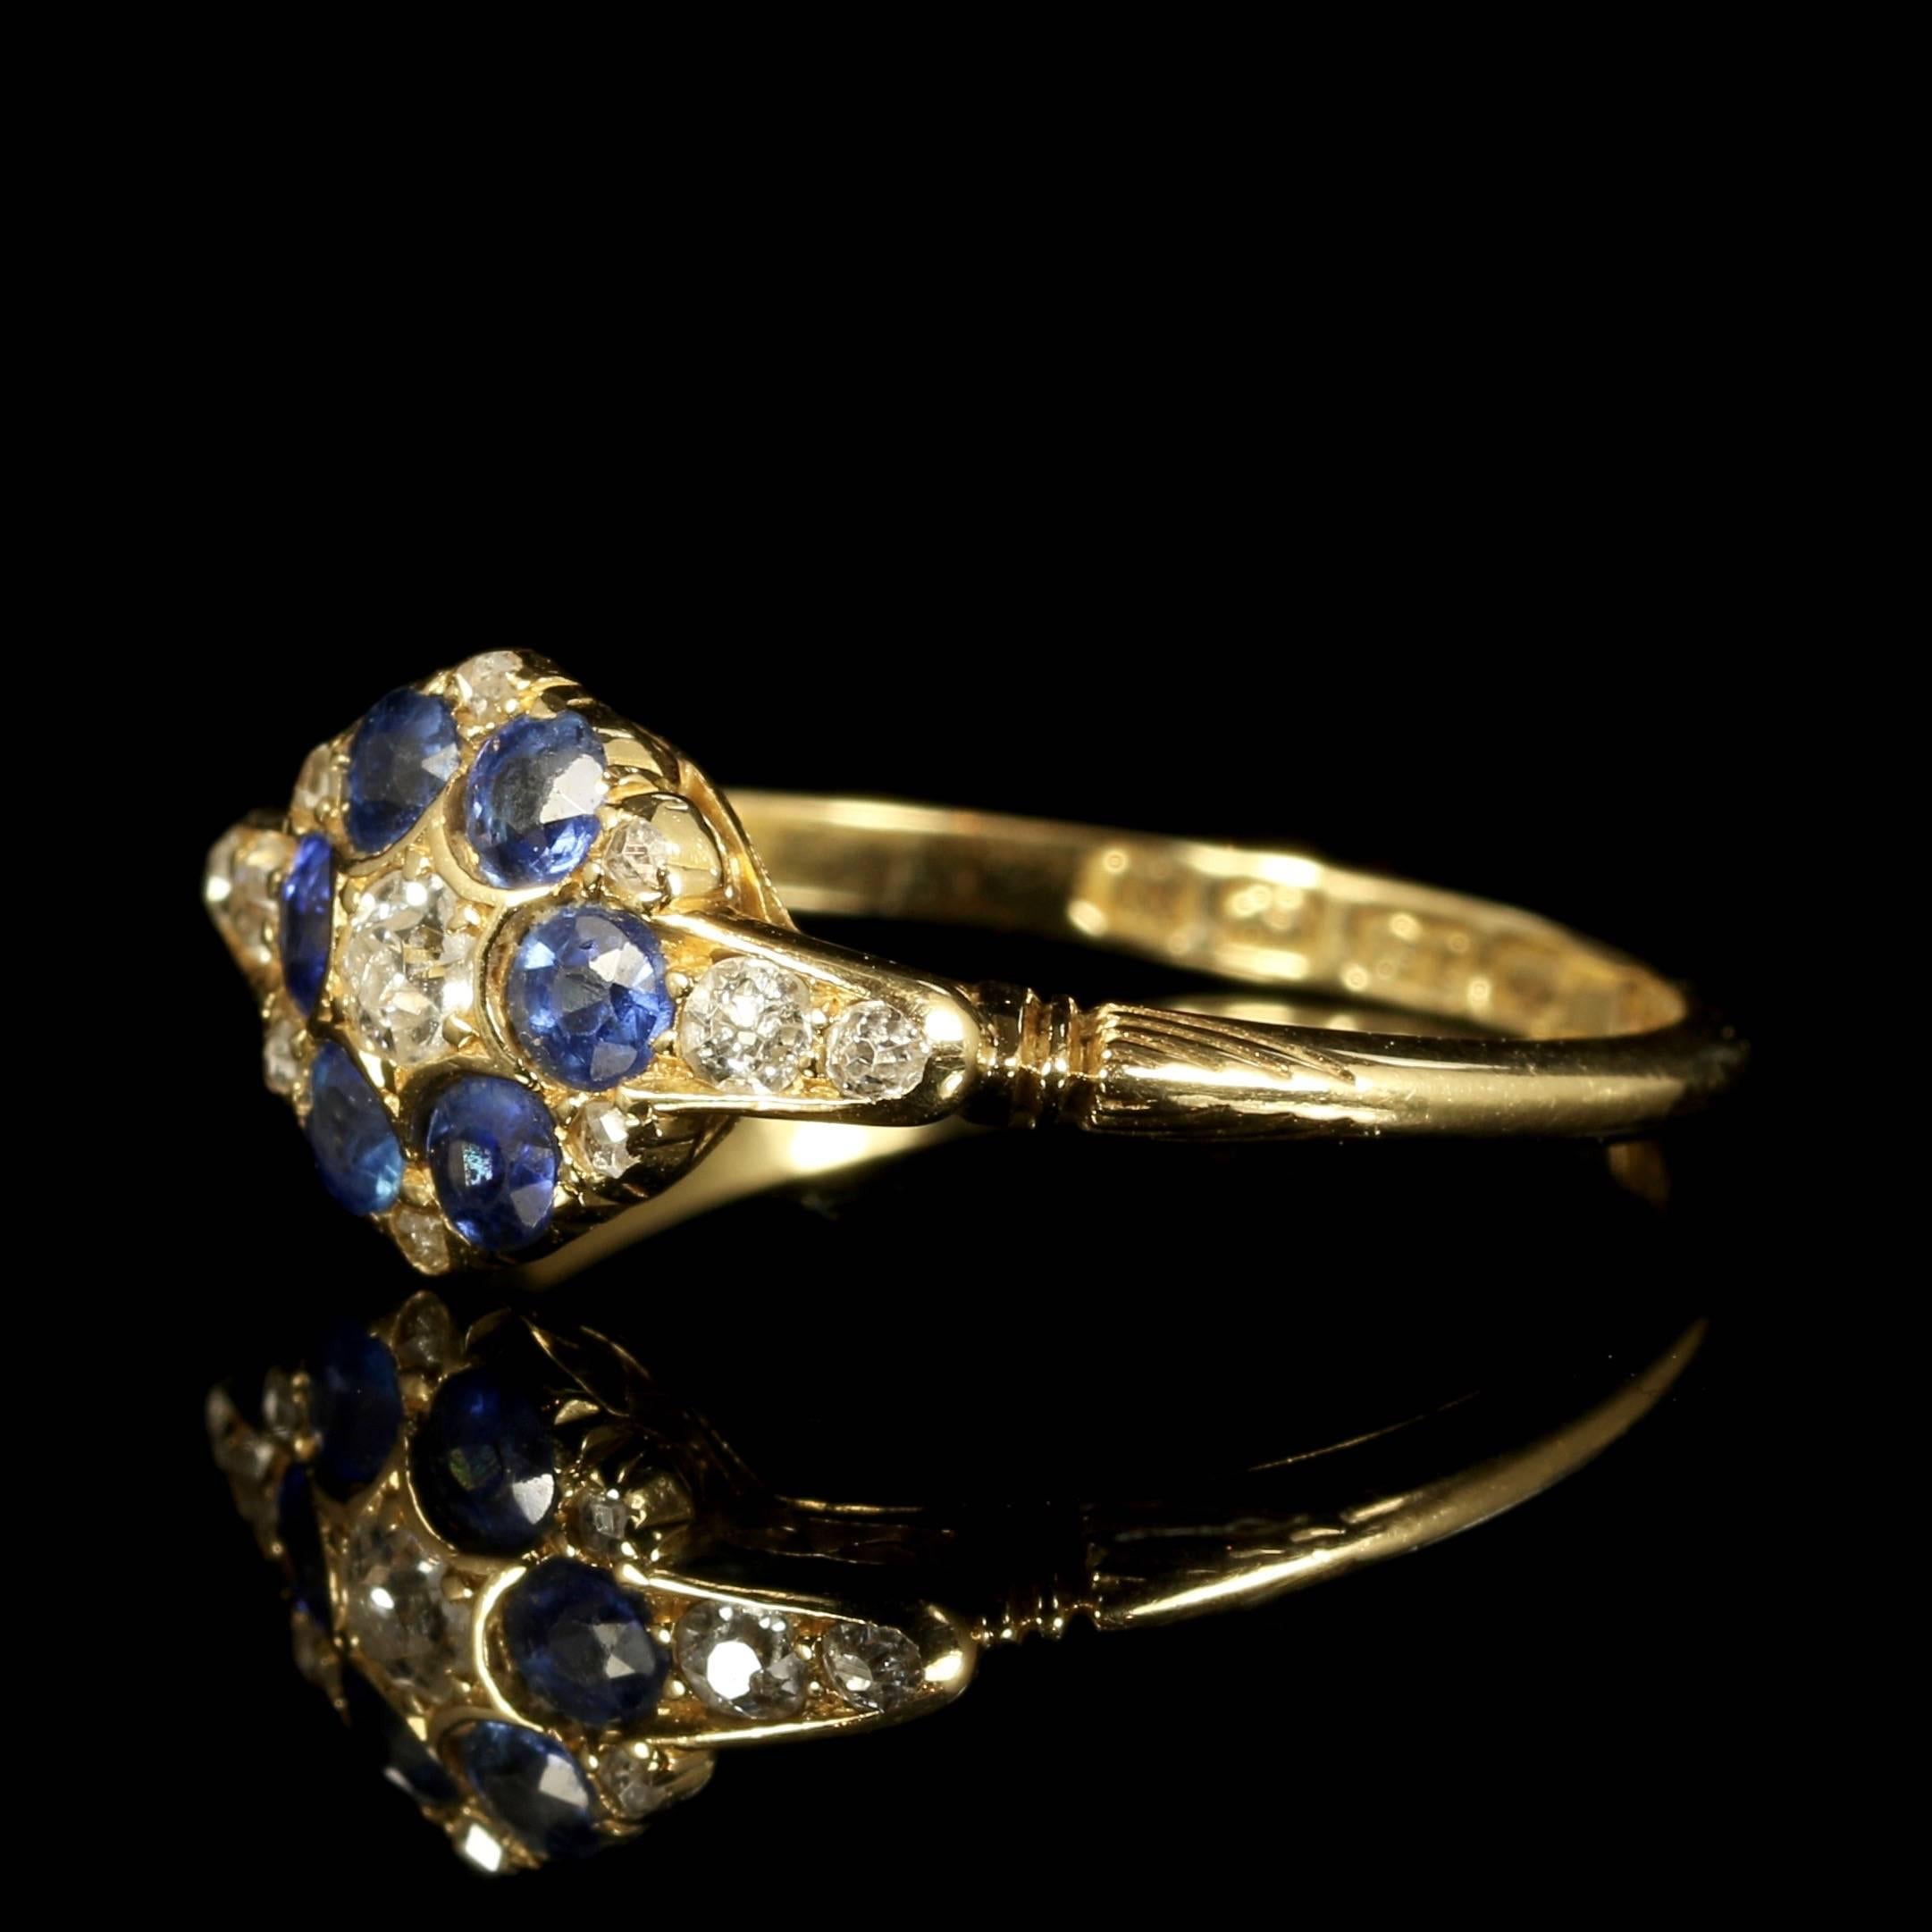 This stunning 18ct yellow gold ring boasts a 0.50CT of Sapphires which are surrounded by lovely Old Cut Diamonds.

Fully hallmarked Birmingham 1911 original makers initials are L and L.

There are approx. 0.30ct of Old Cut Diamonds set into the